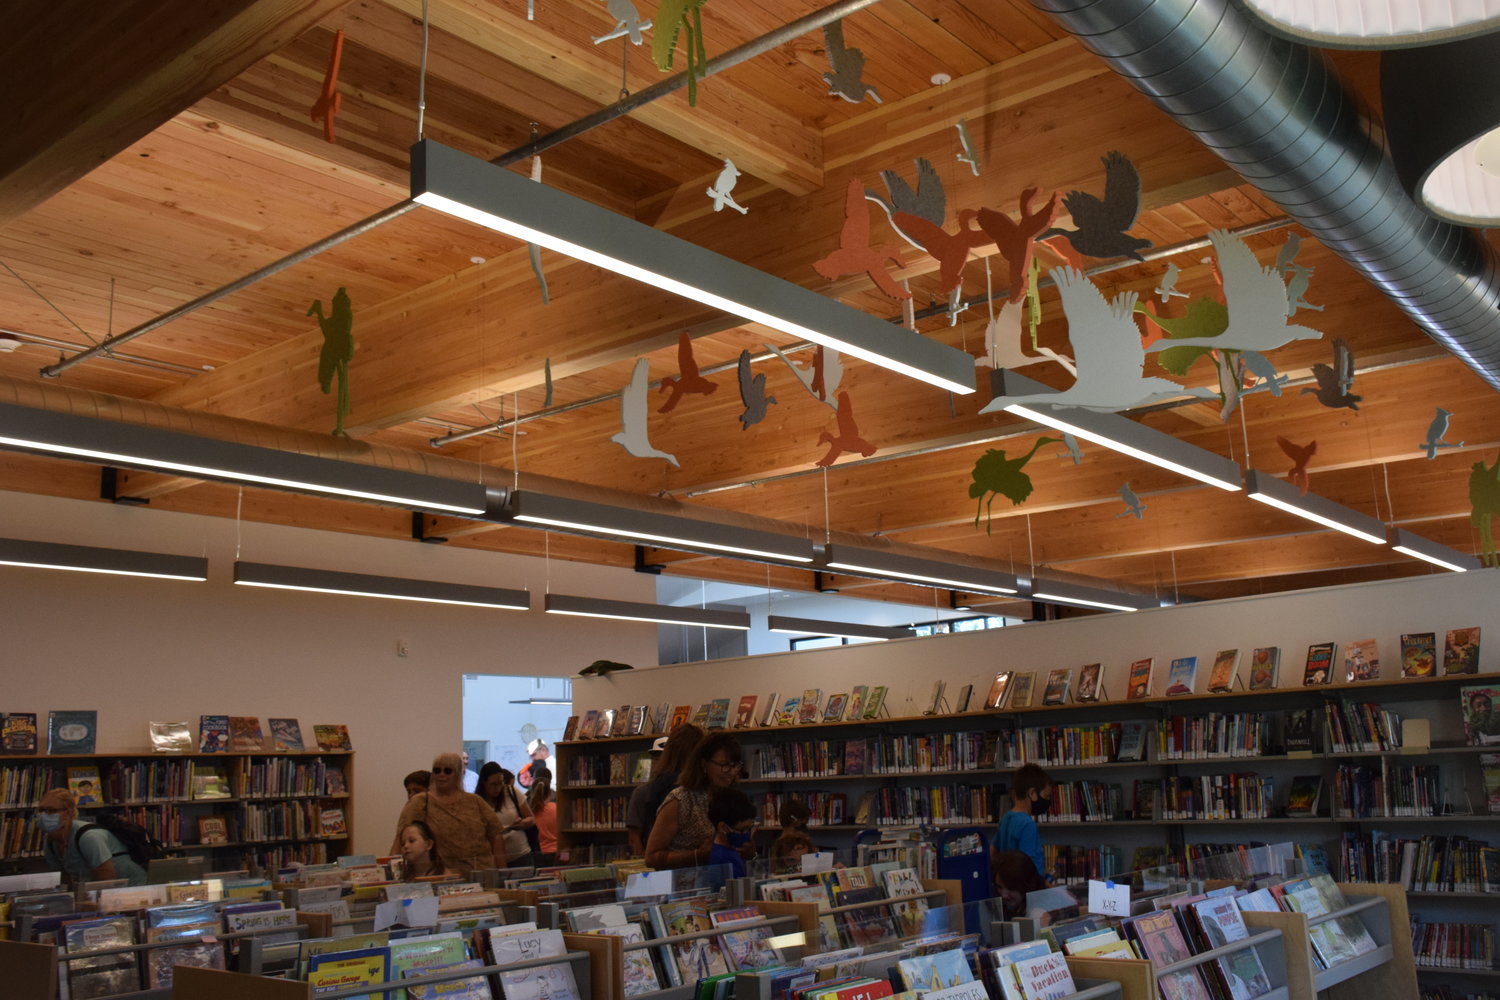 The birds above the children’s section of the Ridgefield Community Library aren’t just ornamental. They act as sound dampeners to keep things quiet in other areas of the library, Fort Vancouver Regional Library District Communications and Marketing Director Tak Kendrick said.